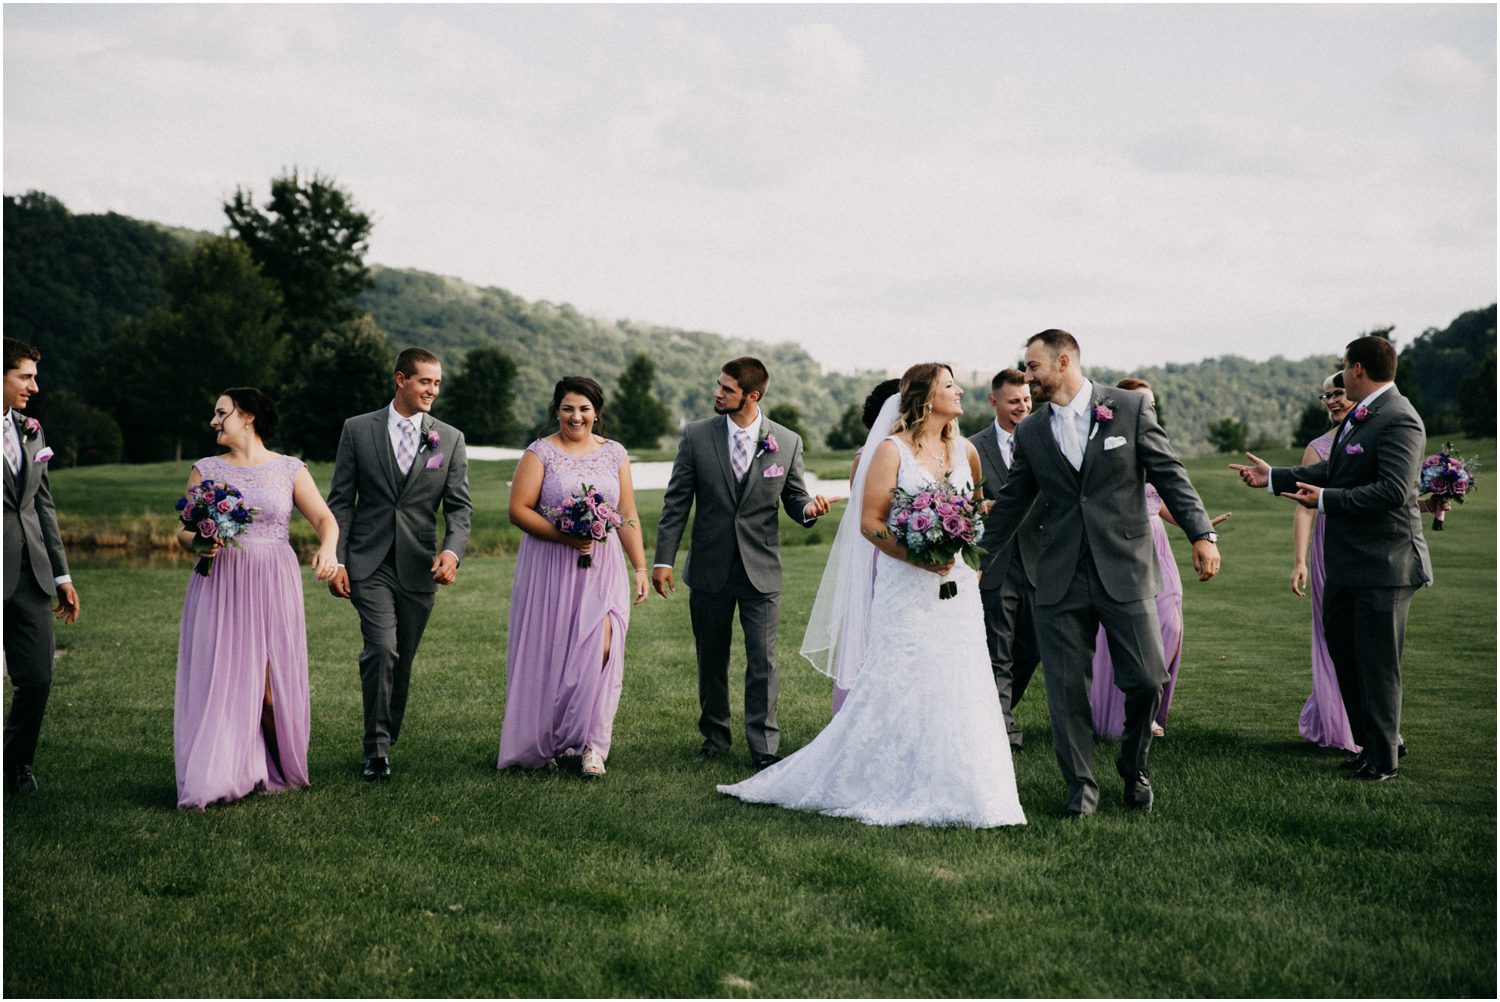 Riverview Country Club Wedding, Central Pennsylvania Wedding Photographer, lavender and gray wedding colors